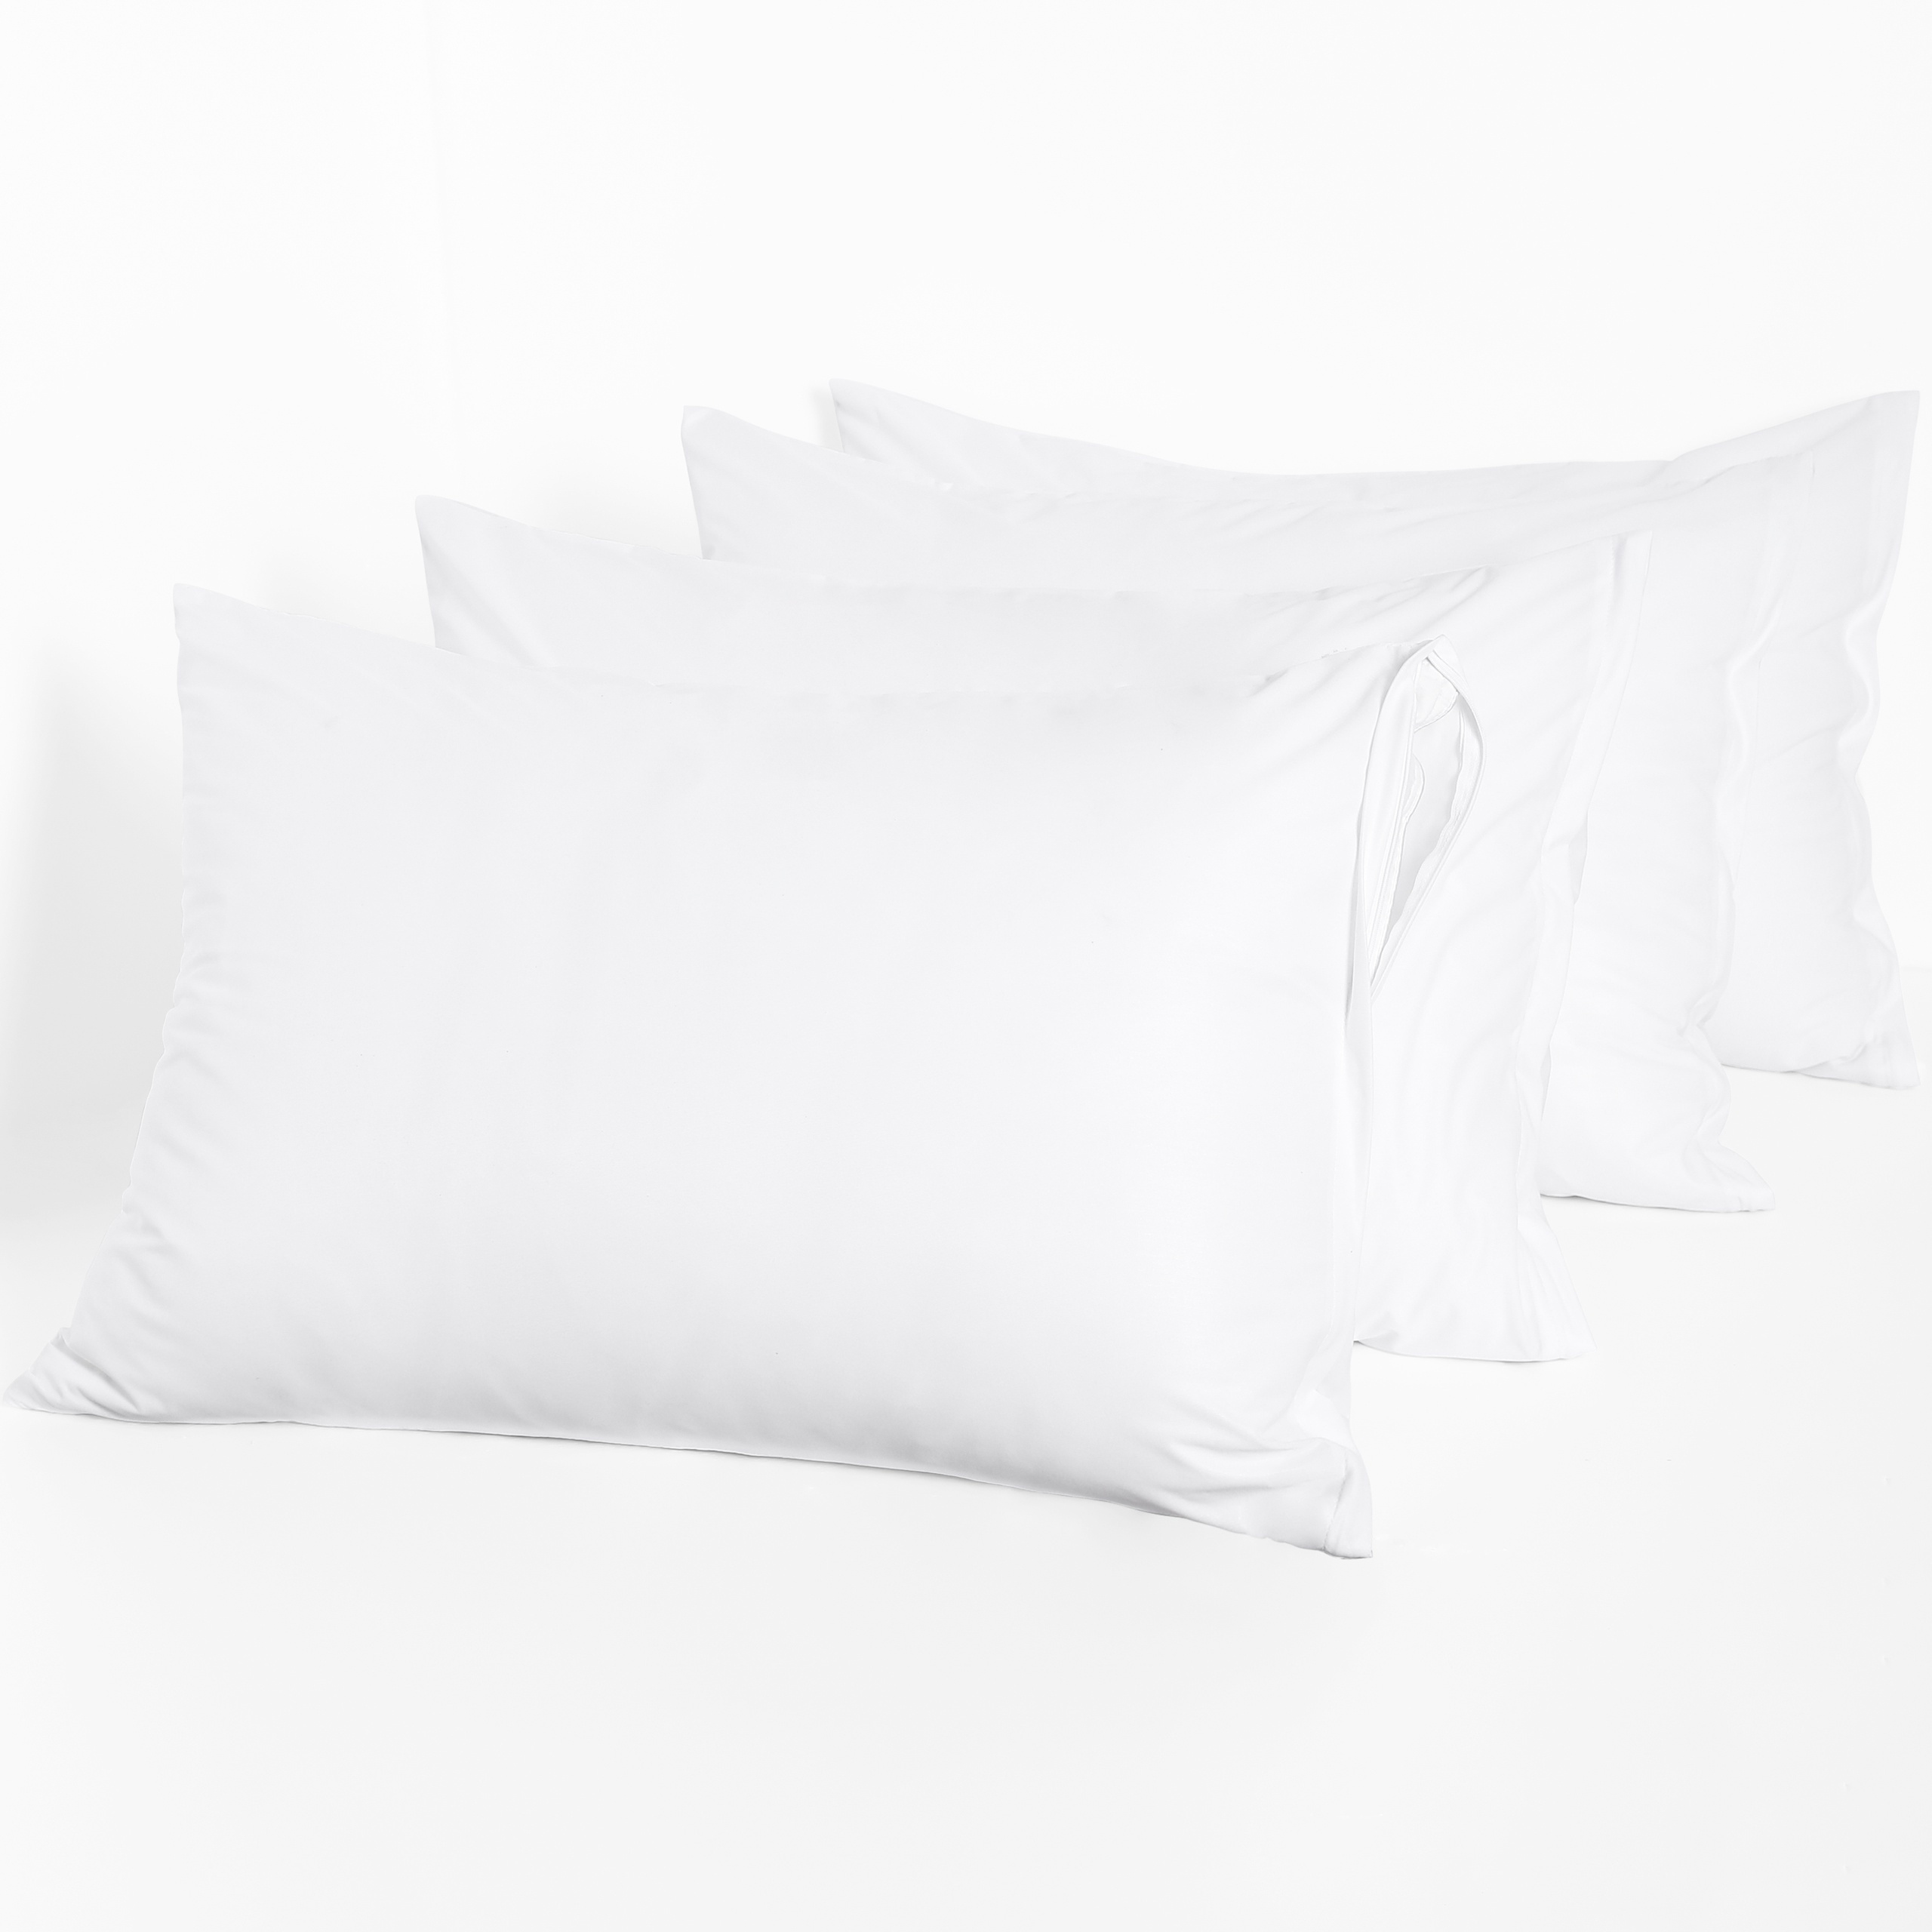 

4 Packs Waterproof Pillow Protectors With Zipper - Protect Your Pillow From Spills And Stains